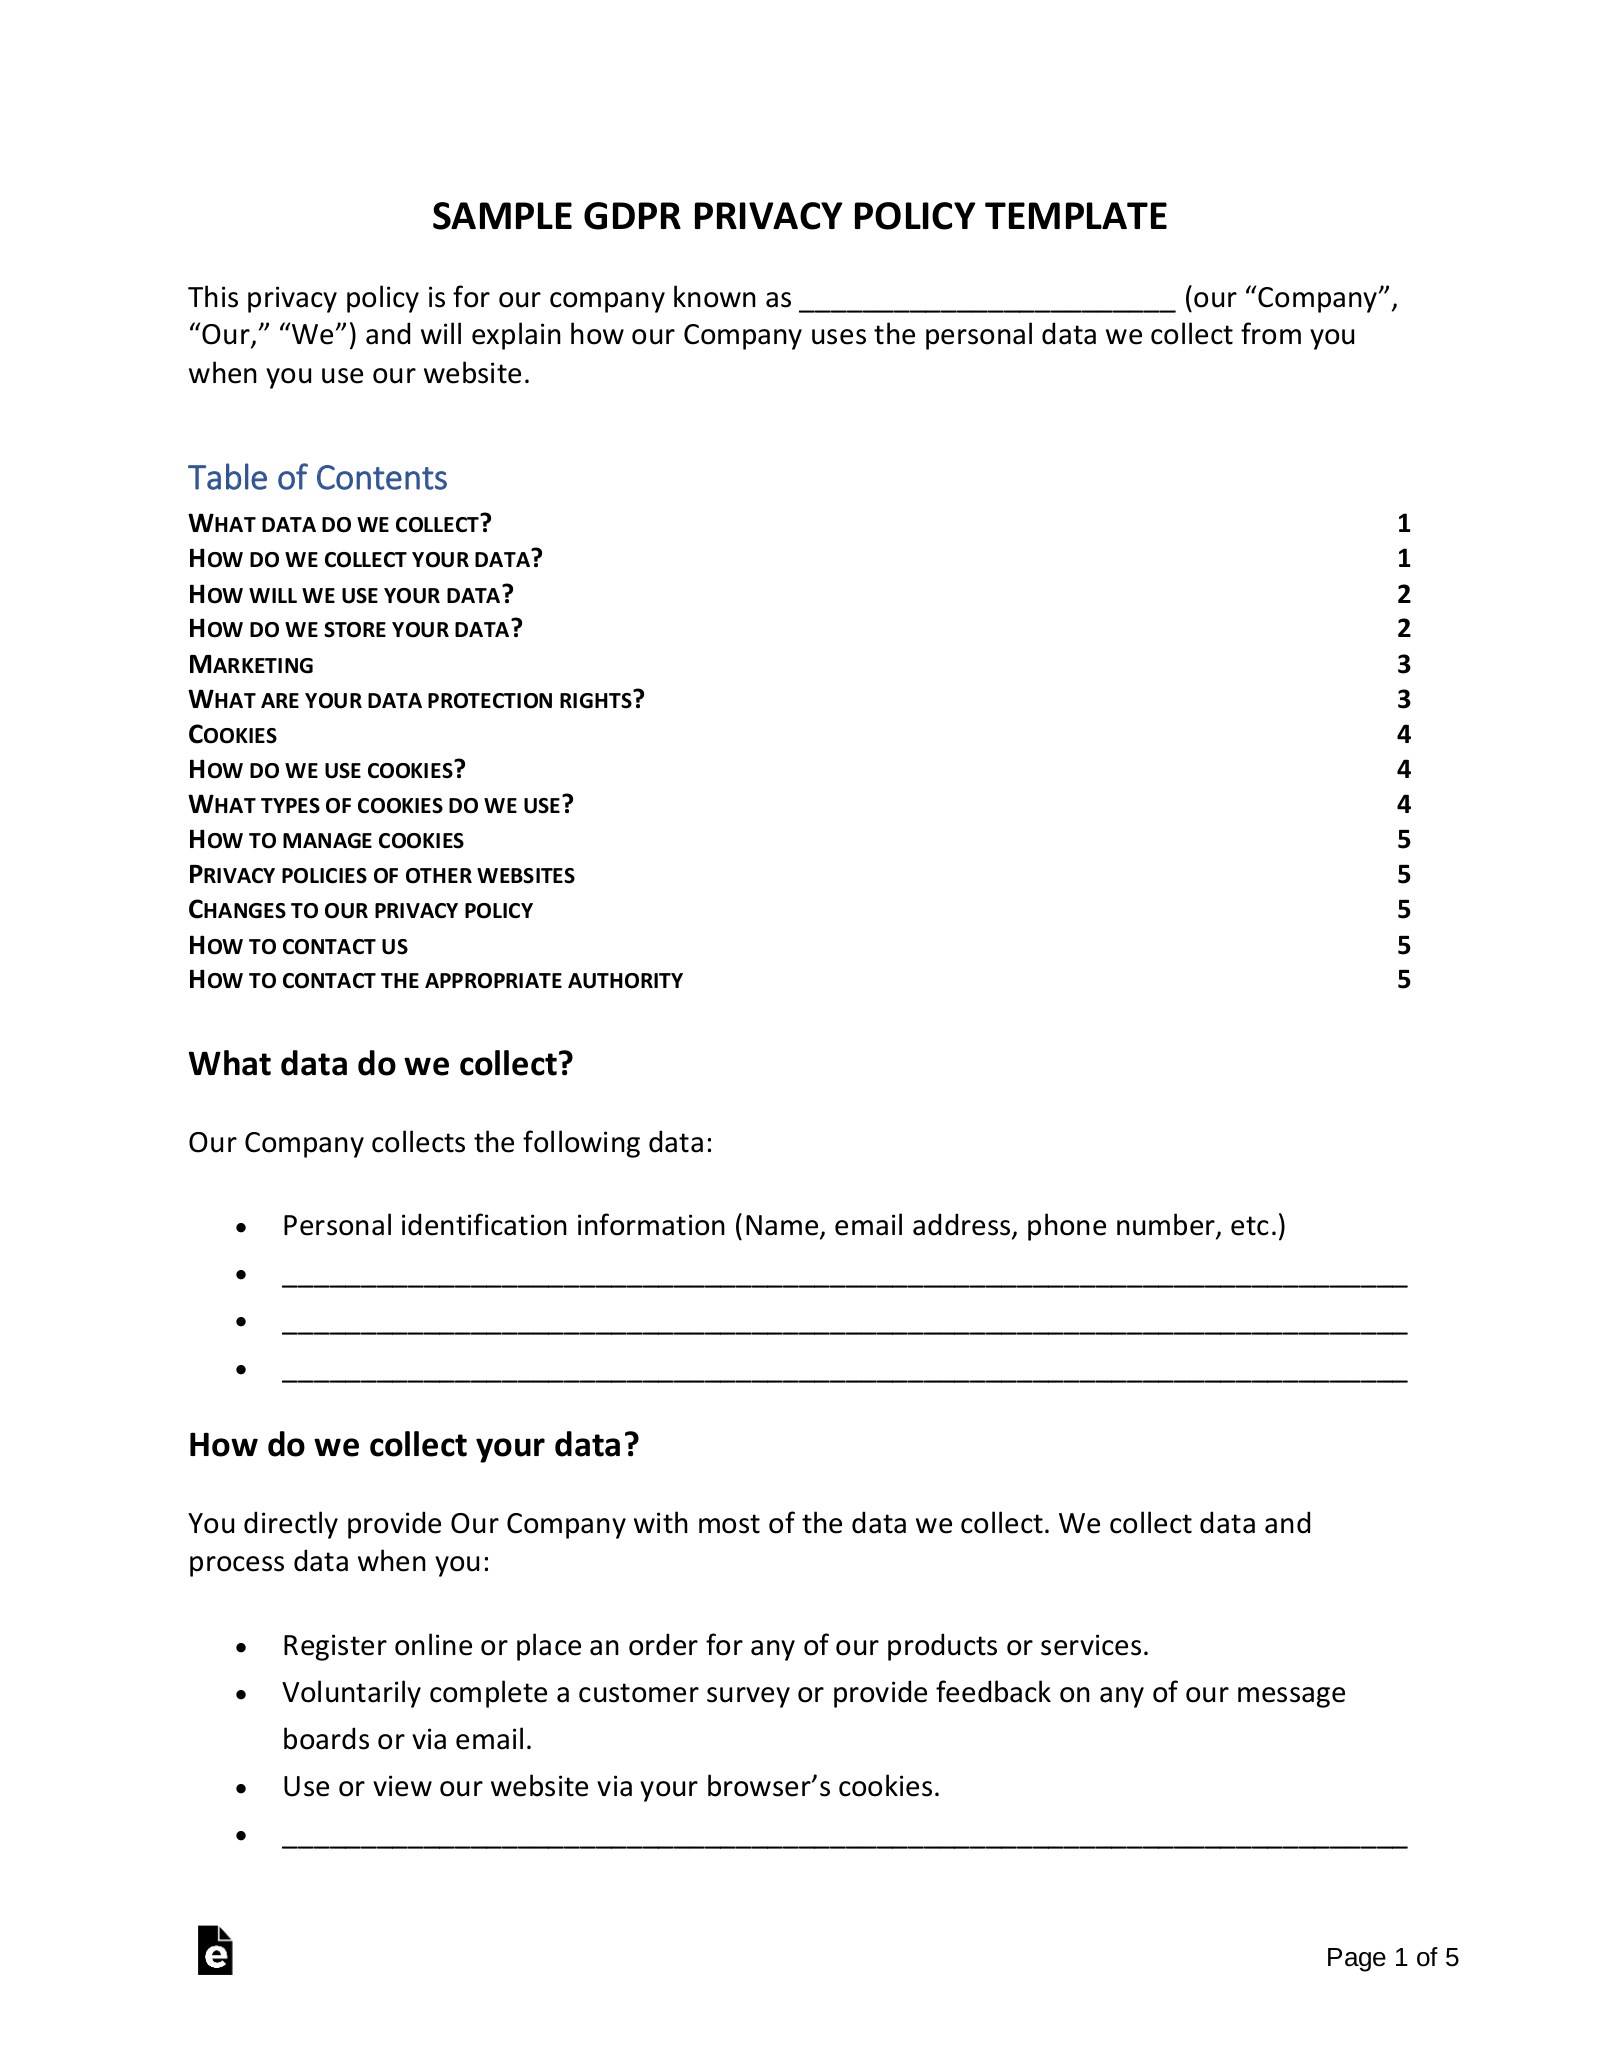 Sample GDPR Privacy Policy Template 